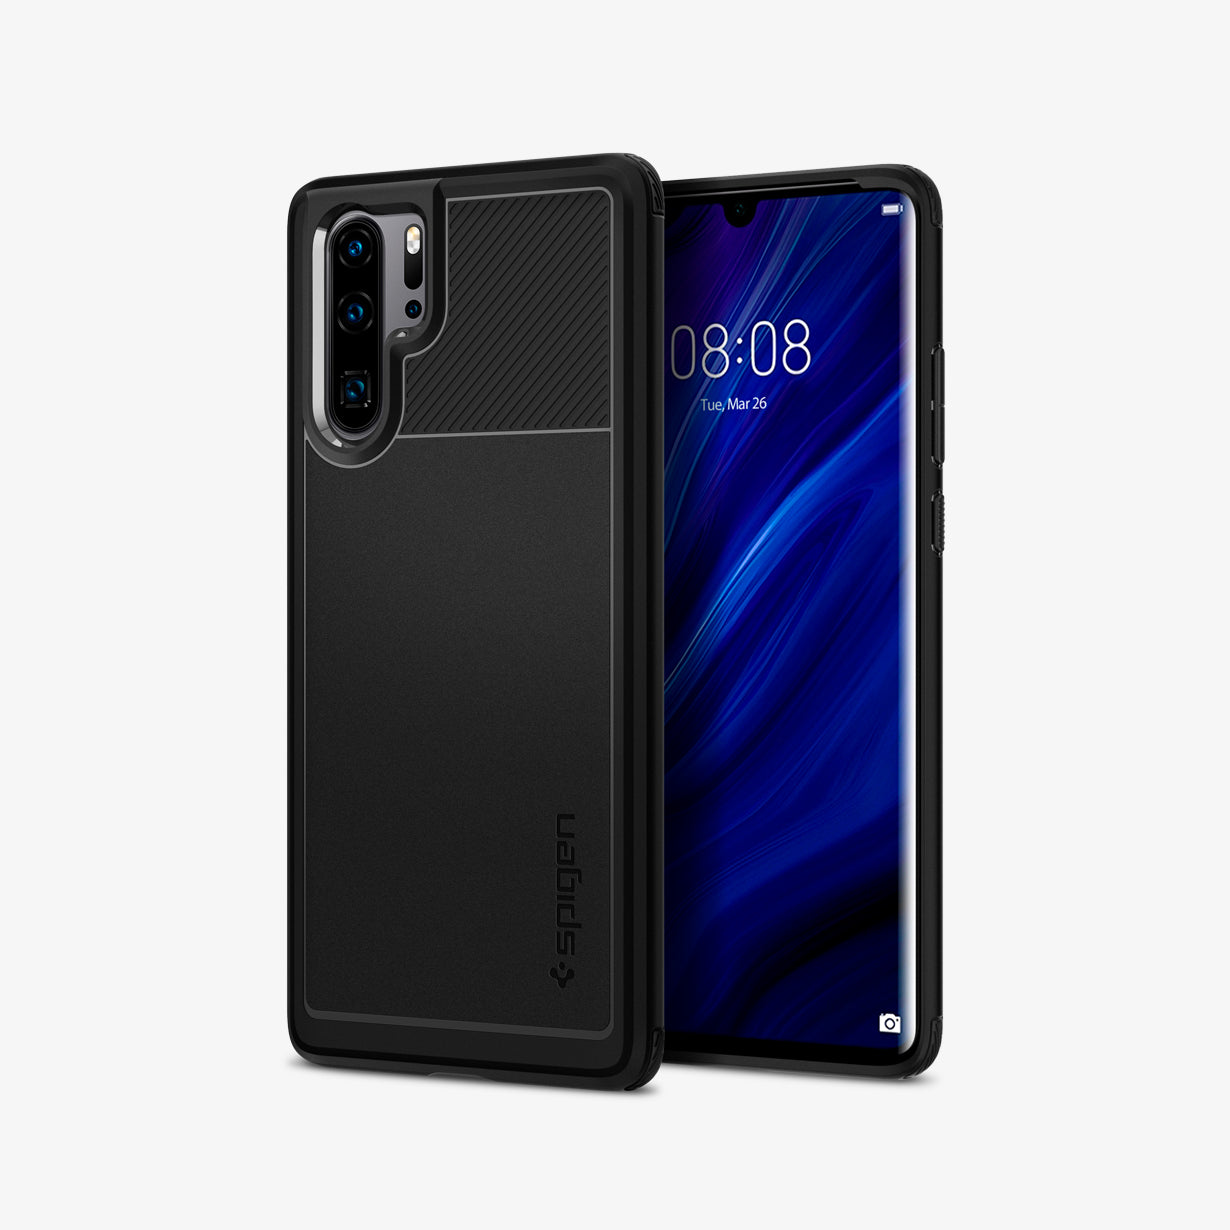 L37CS25725 - Huawei P30 Pro Case Rugged Armor in black showing the back and front